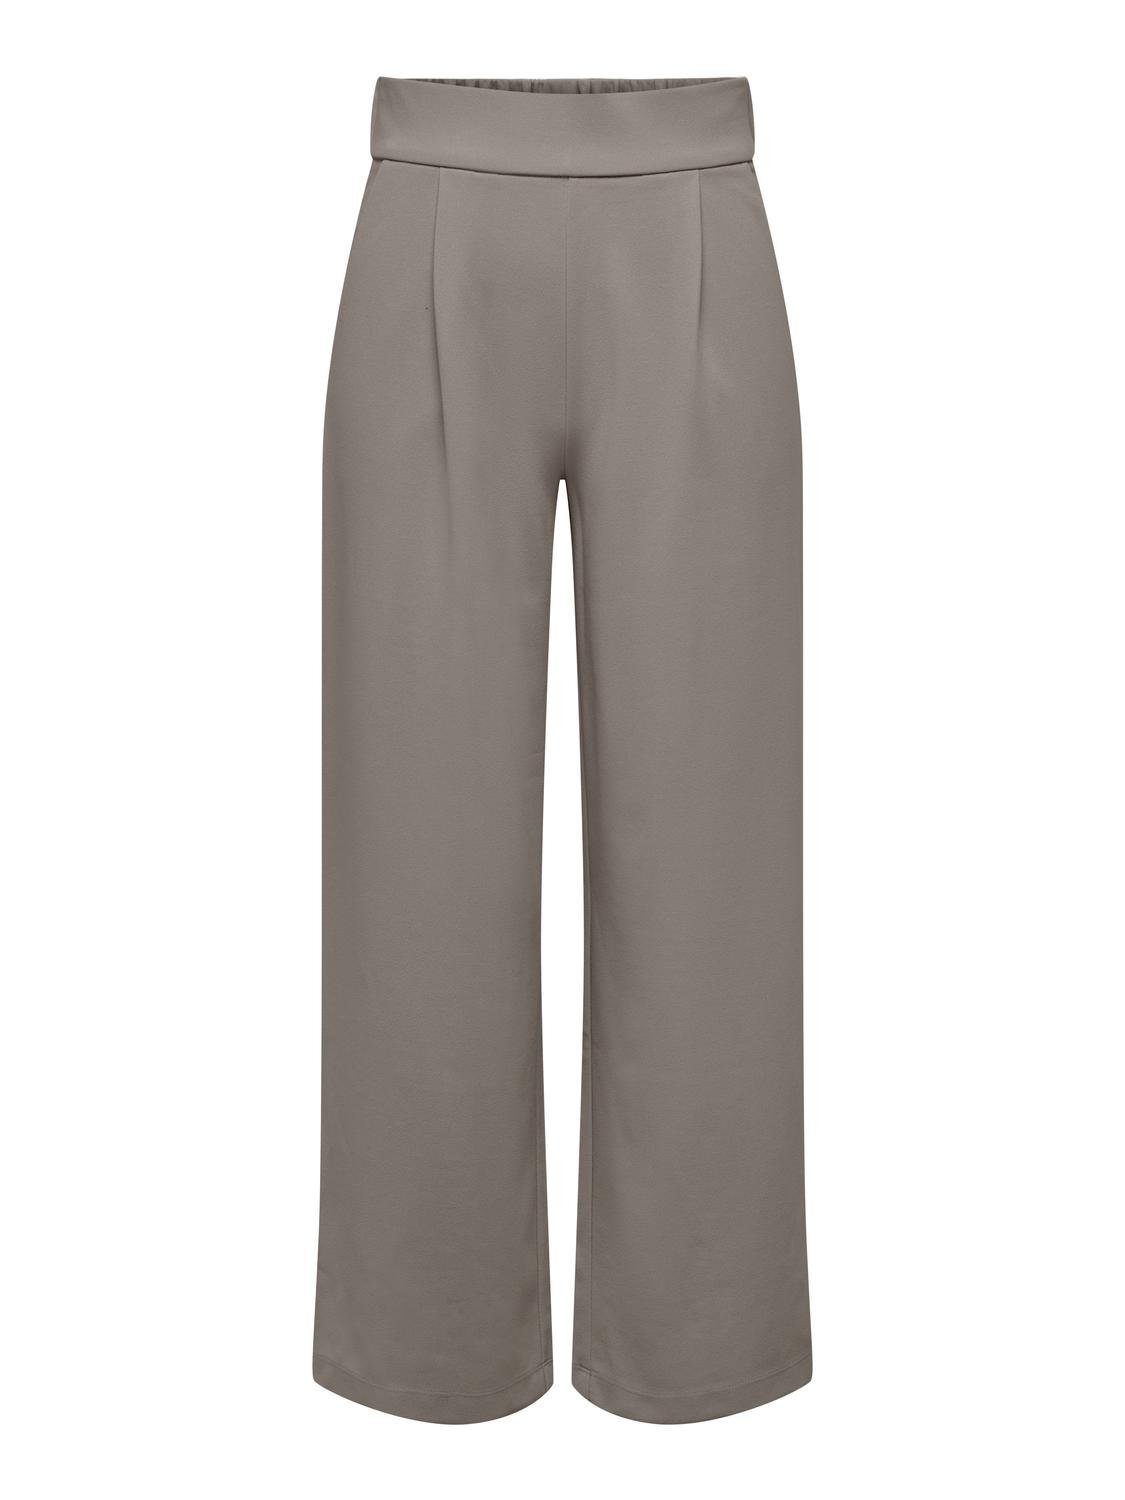 ONLY Flared high waisted pants -Driftwood - 15305888